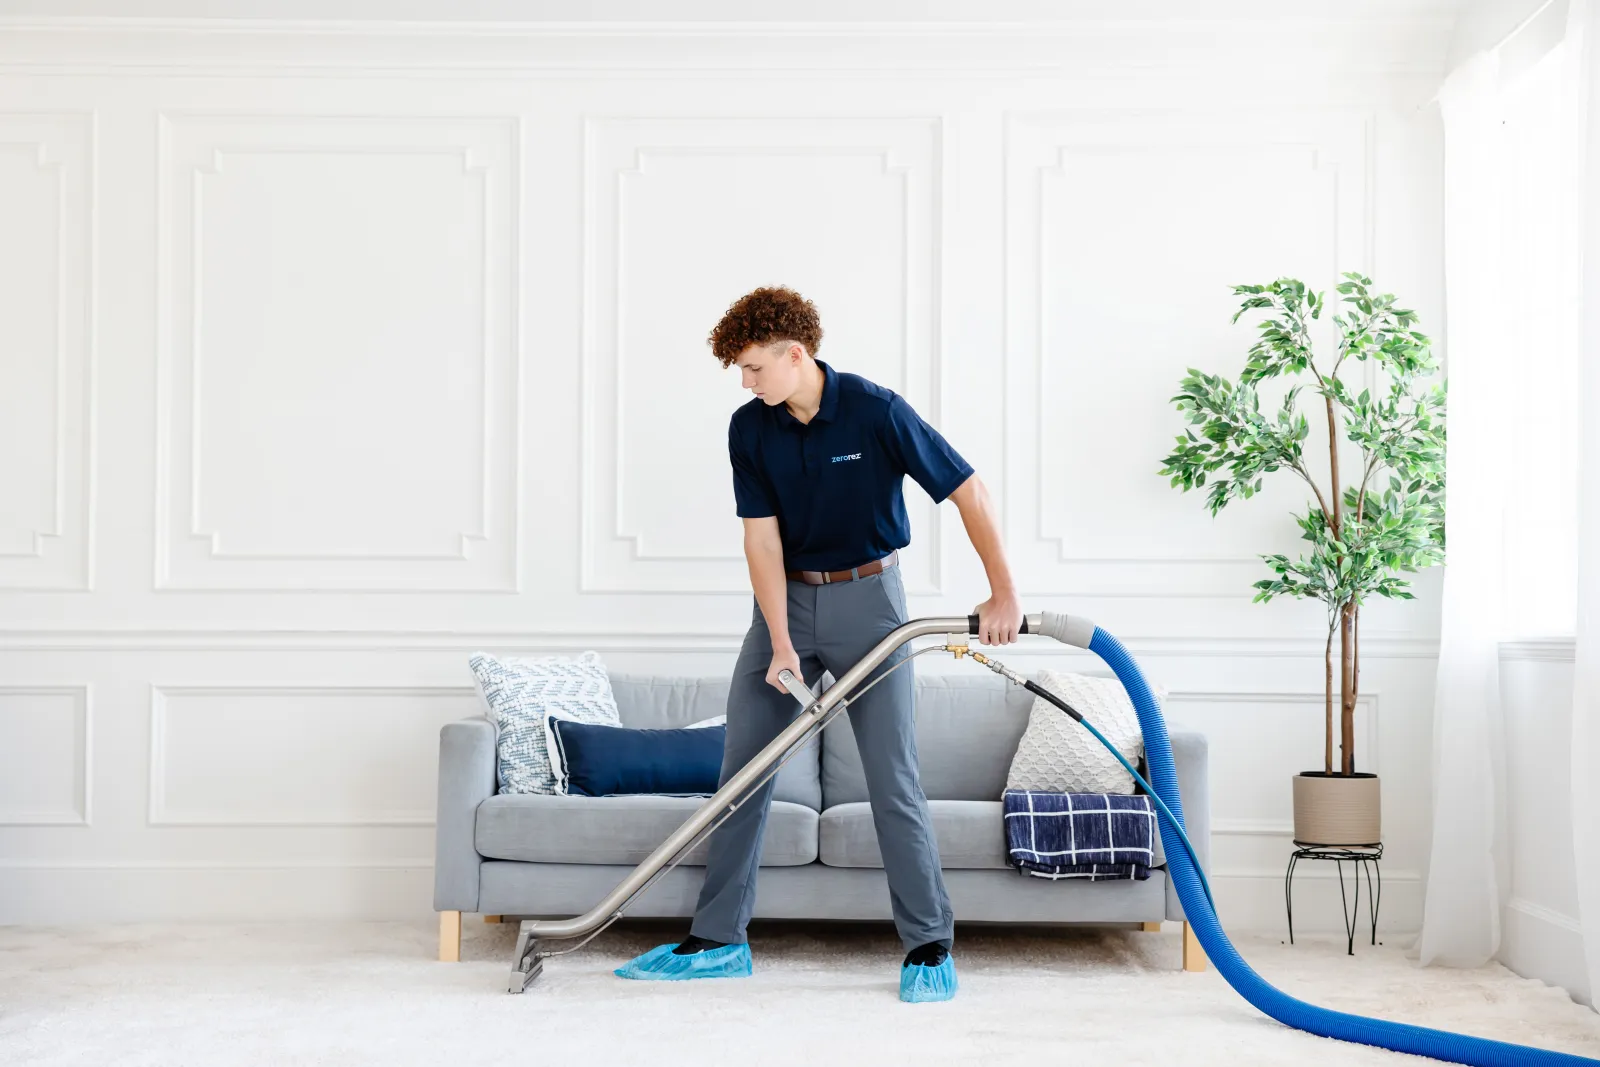 Male Zerorez carpet cleaning technician cleaning with the Zr Wand to get a white carpet in a living room clean